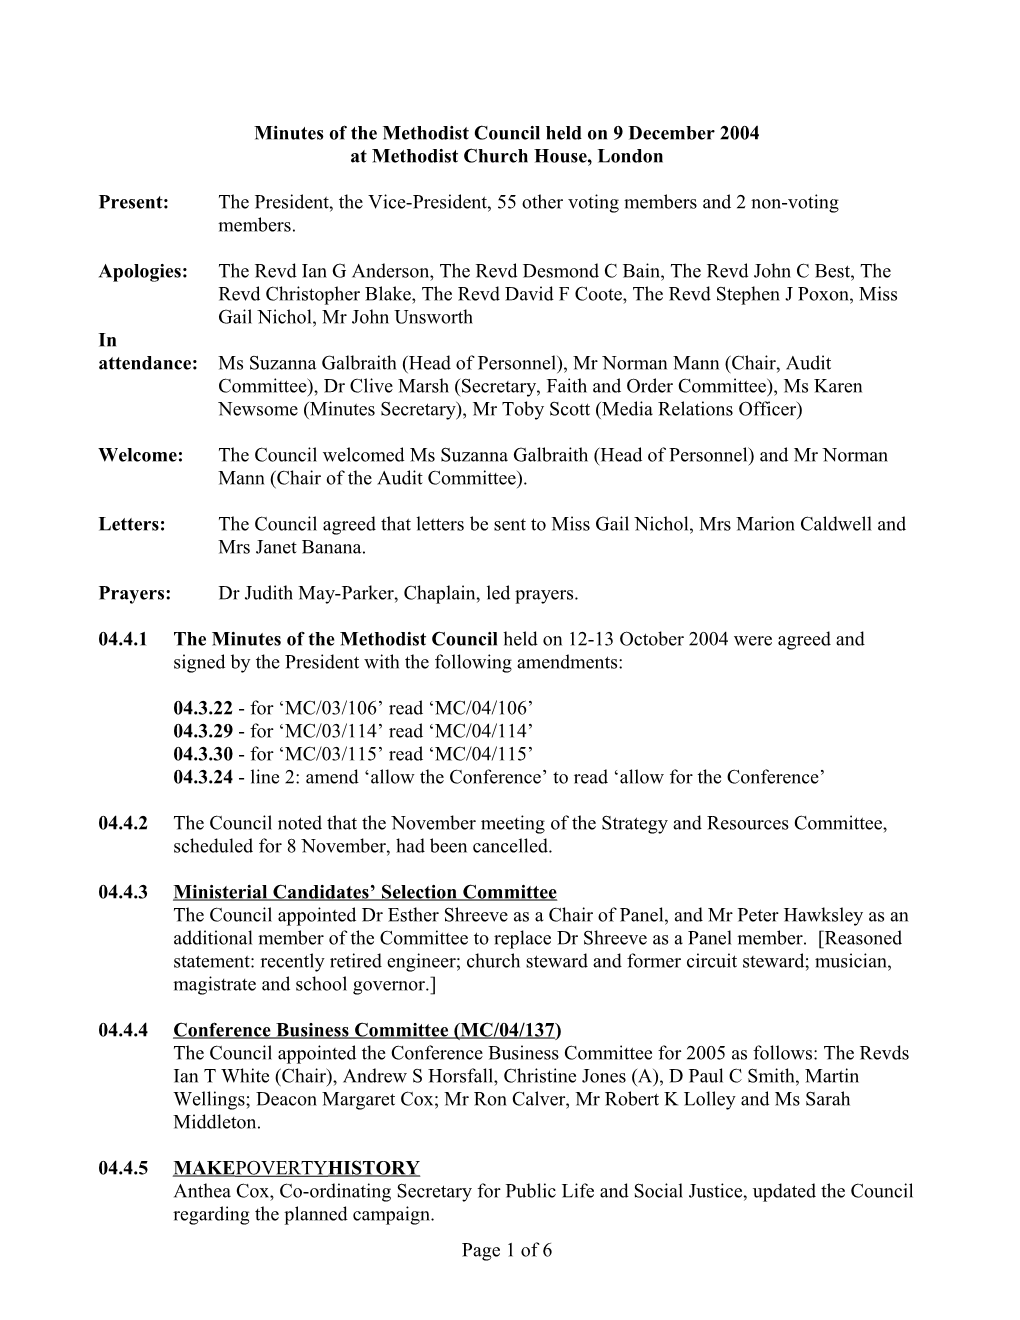 Minutes of the Methodist Council Held on 9 December 2004